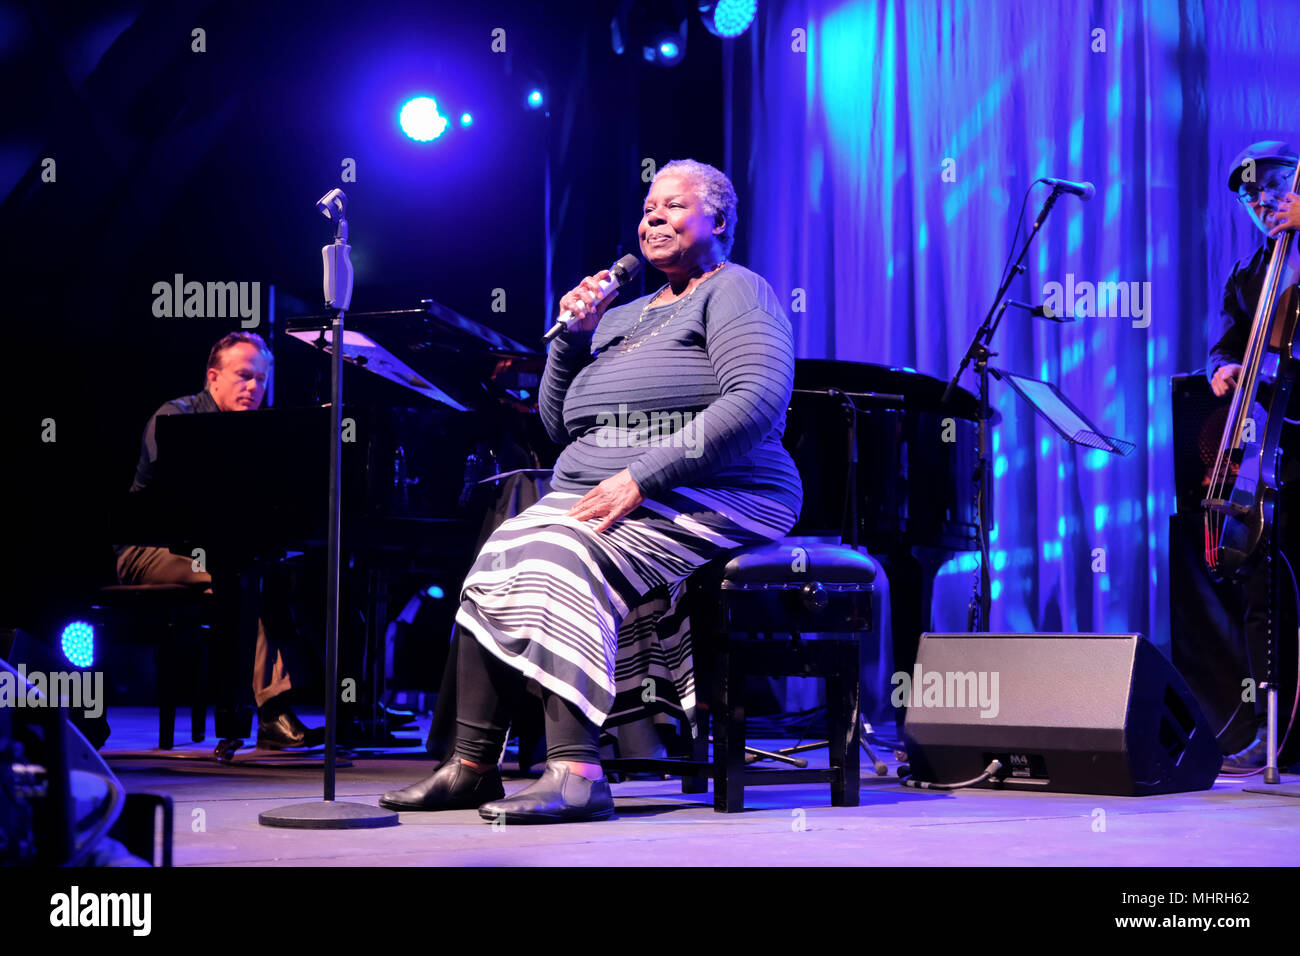 Cheltenham, UK, May 2, 2018. American jazz and R&B singer, Randy Crawford performs at the 2018 Jazz Festival. Credit: MusicLive/ Alamy Live News Stock Photo